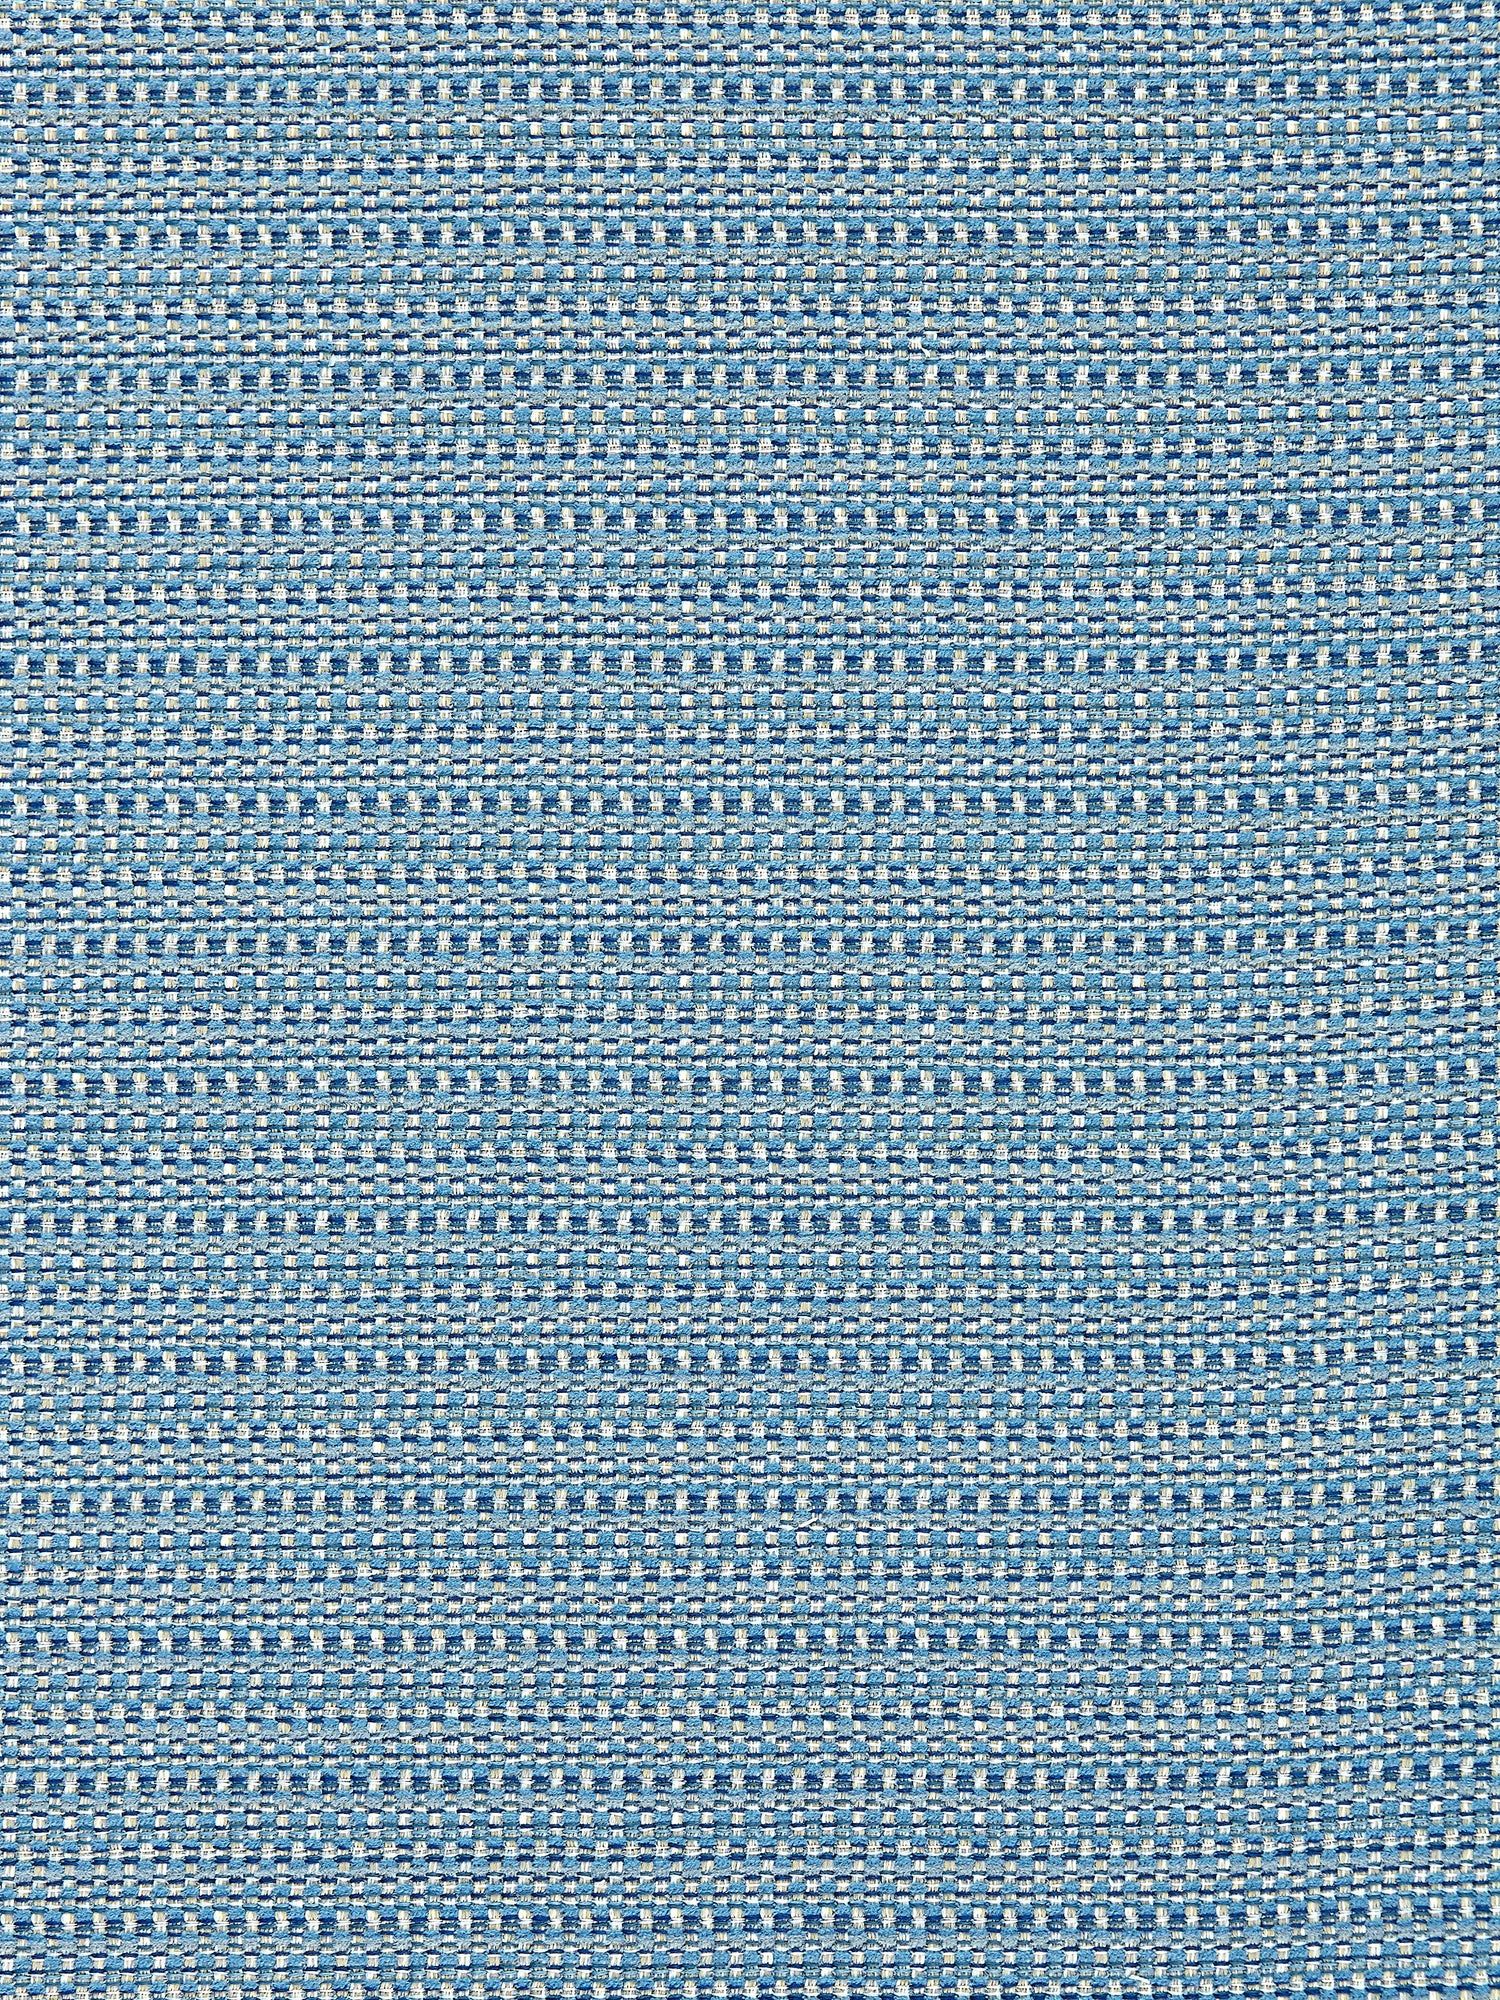 Summer Tweed fabric in denim color - pattern number SC 000327061 - by Scalamandre in the Scalamandre Fabrics Book 1 collection